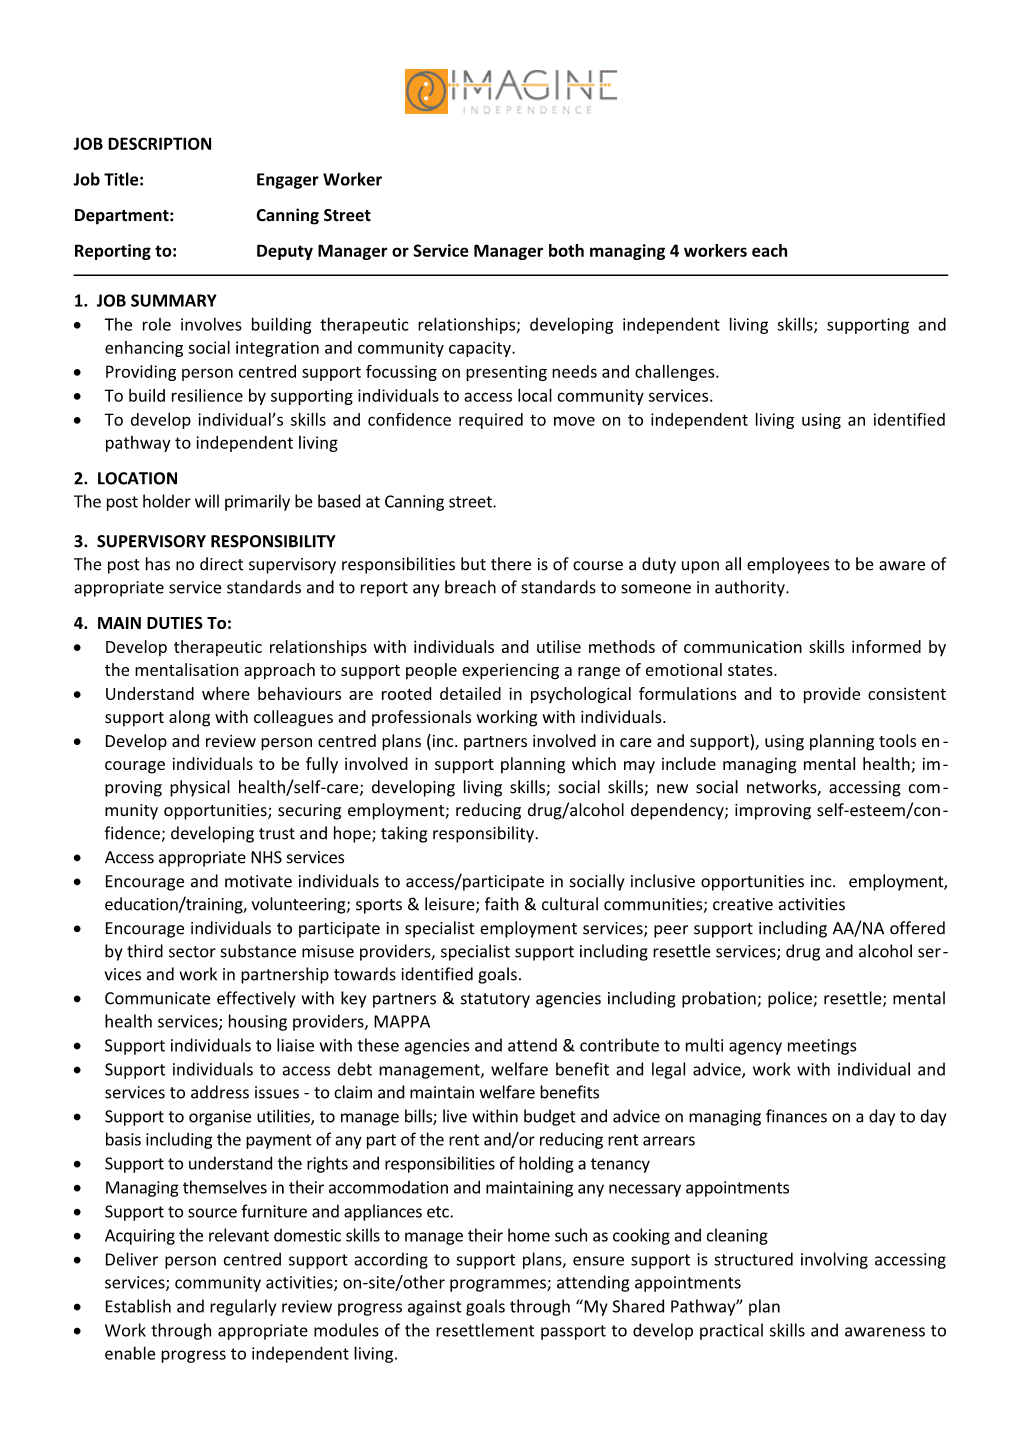 Job Title:Engager Worker